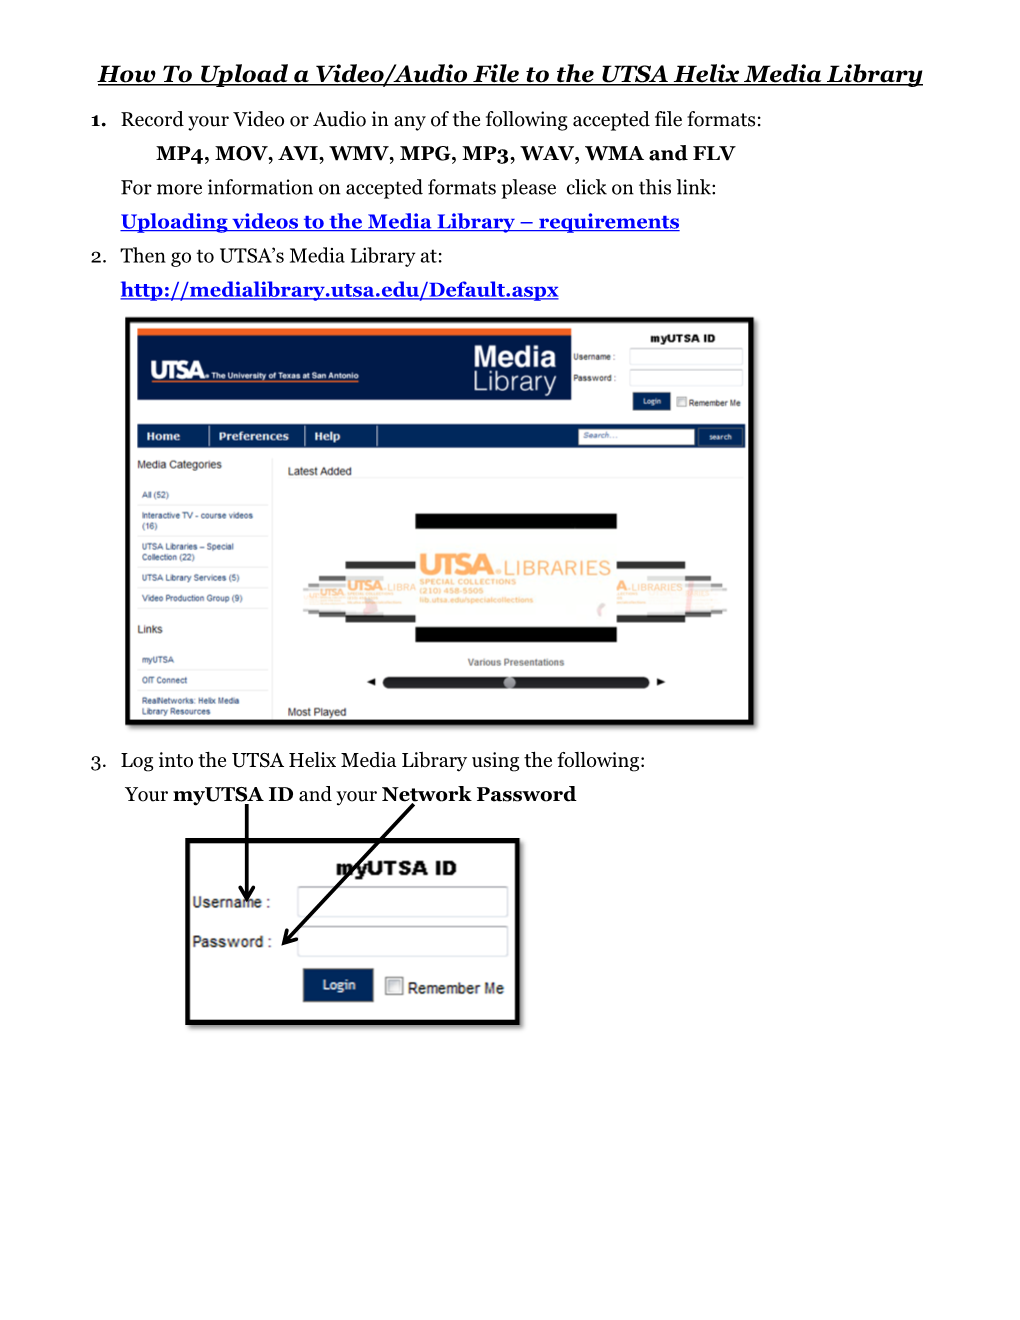 How to Upload a Video/Audio File to the UTSA Helix Media Library